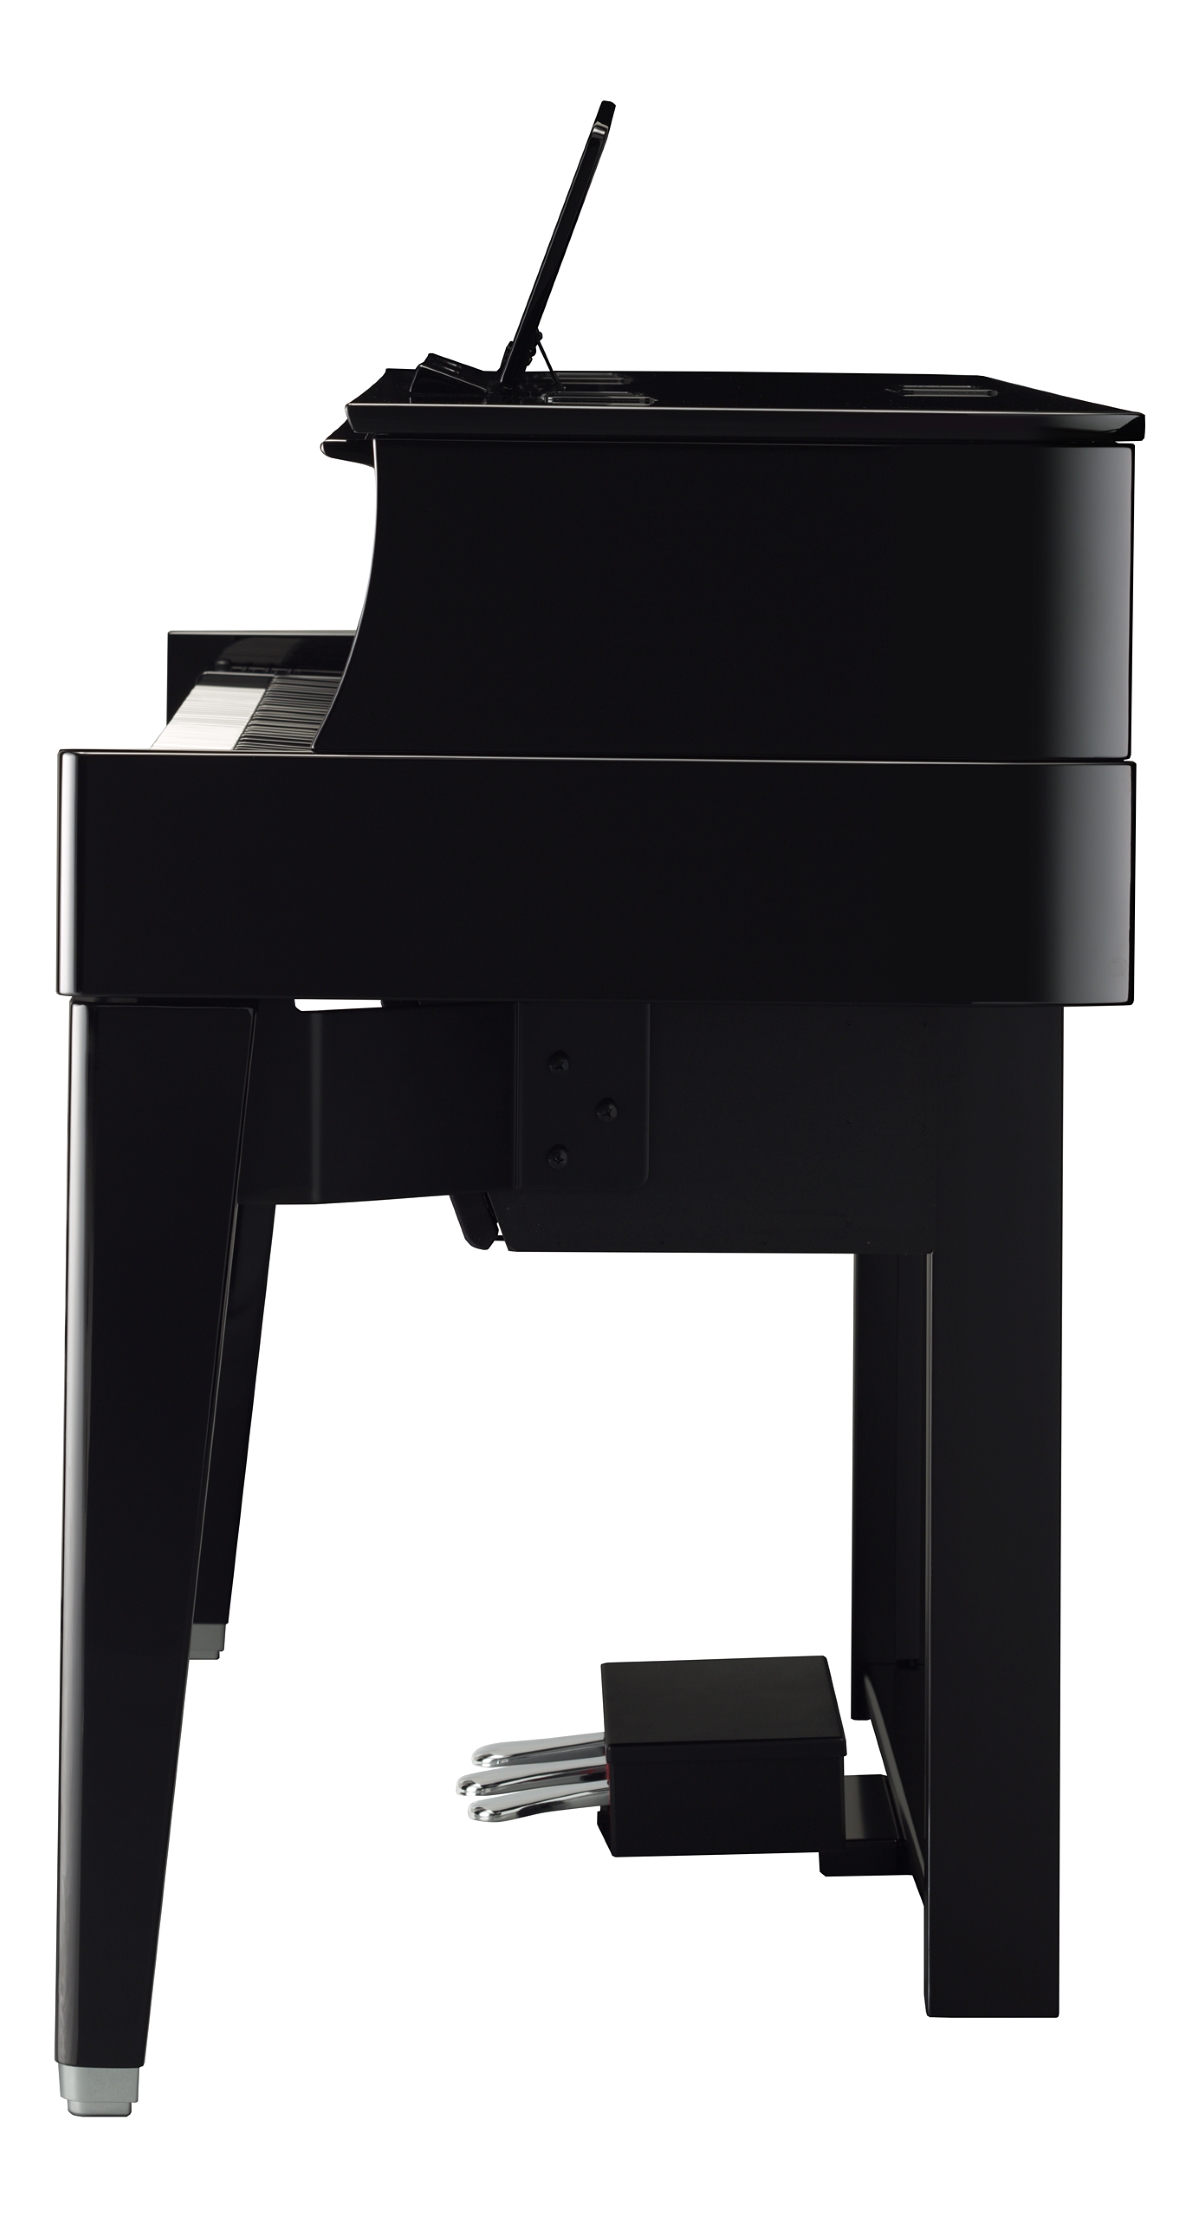 Yamaha N-1x - Digital piano with stand - Variation 5